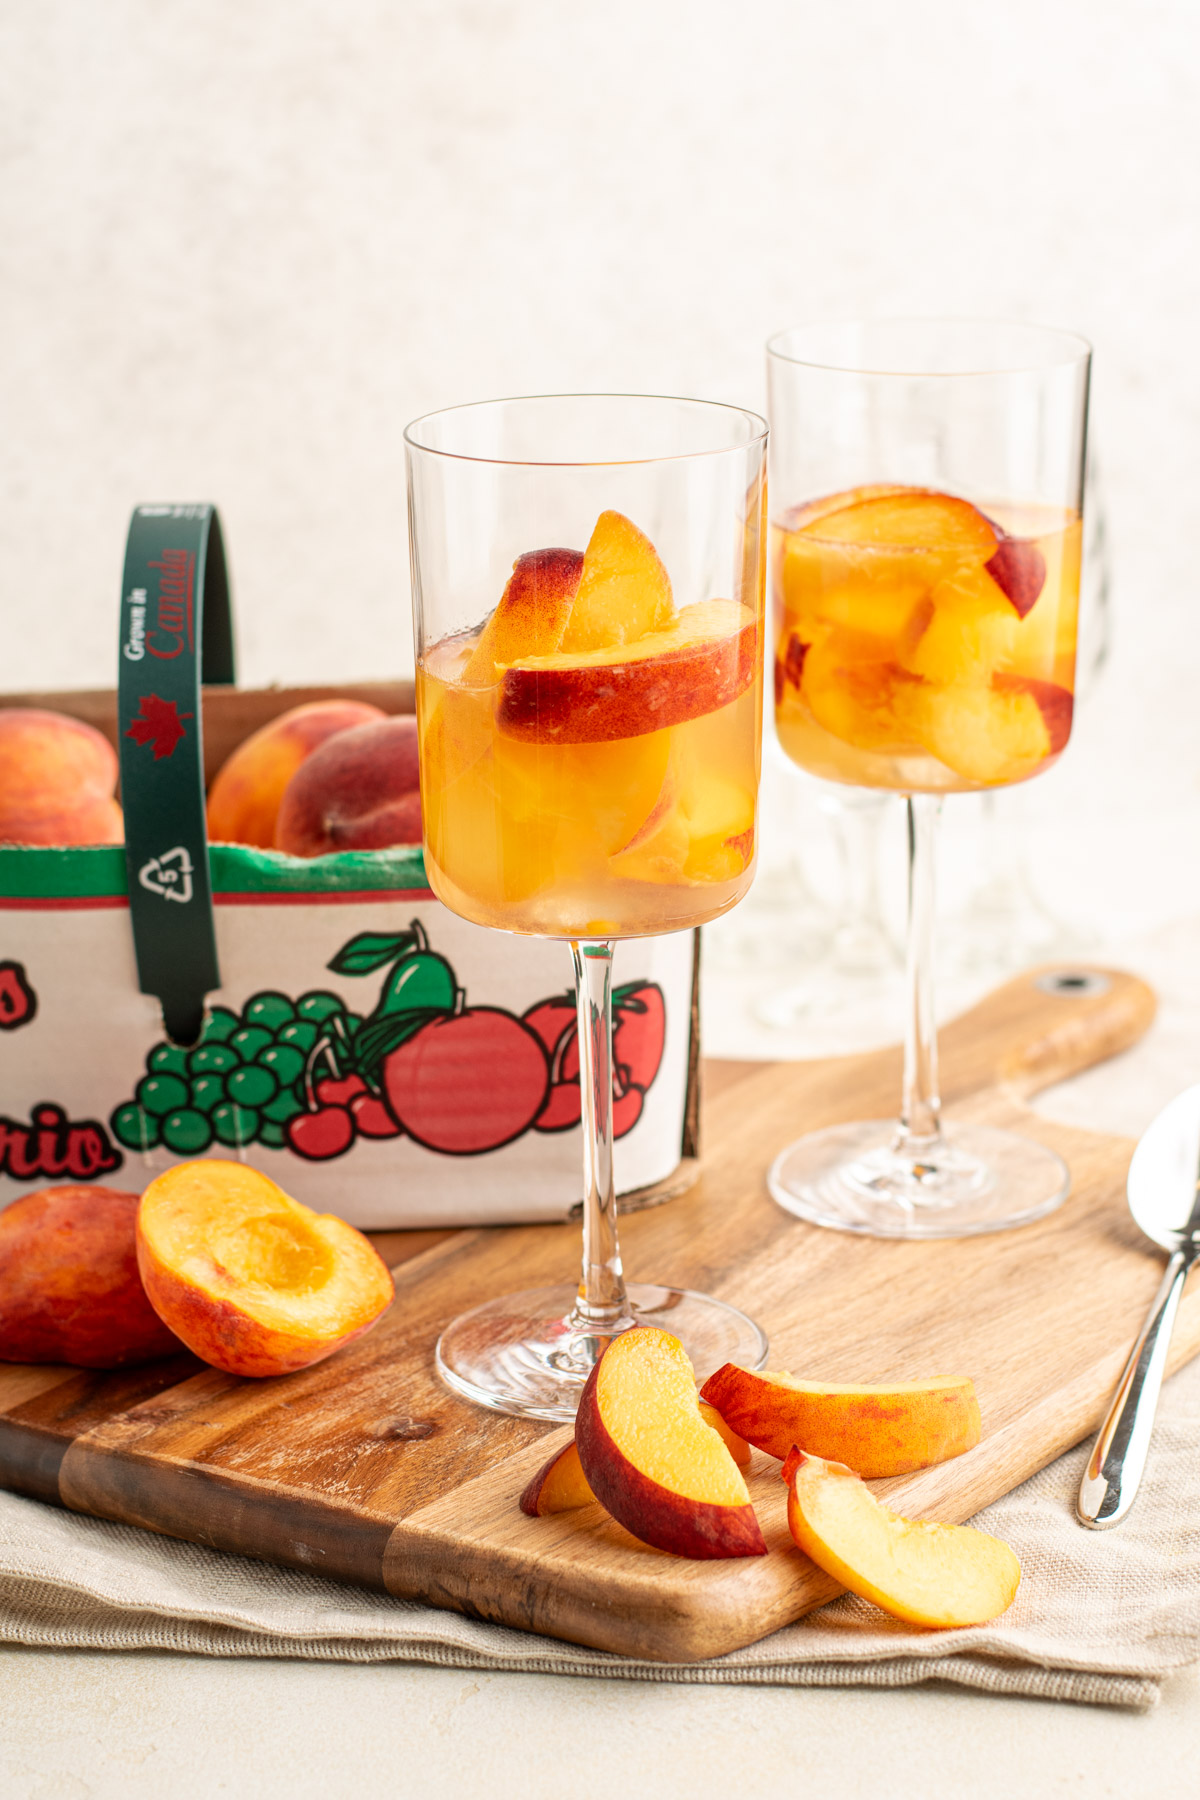 two wine glasses with peach slices and wine, and a basked with peaches in the back.